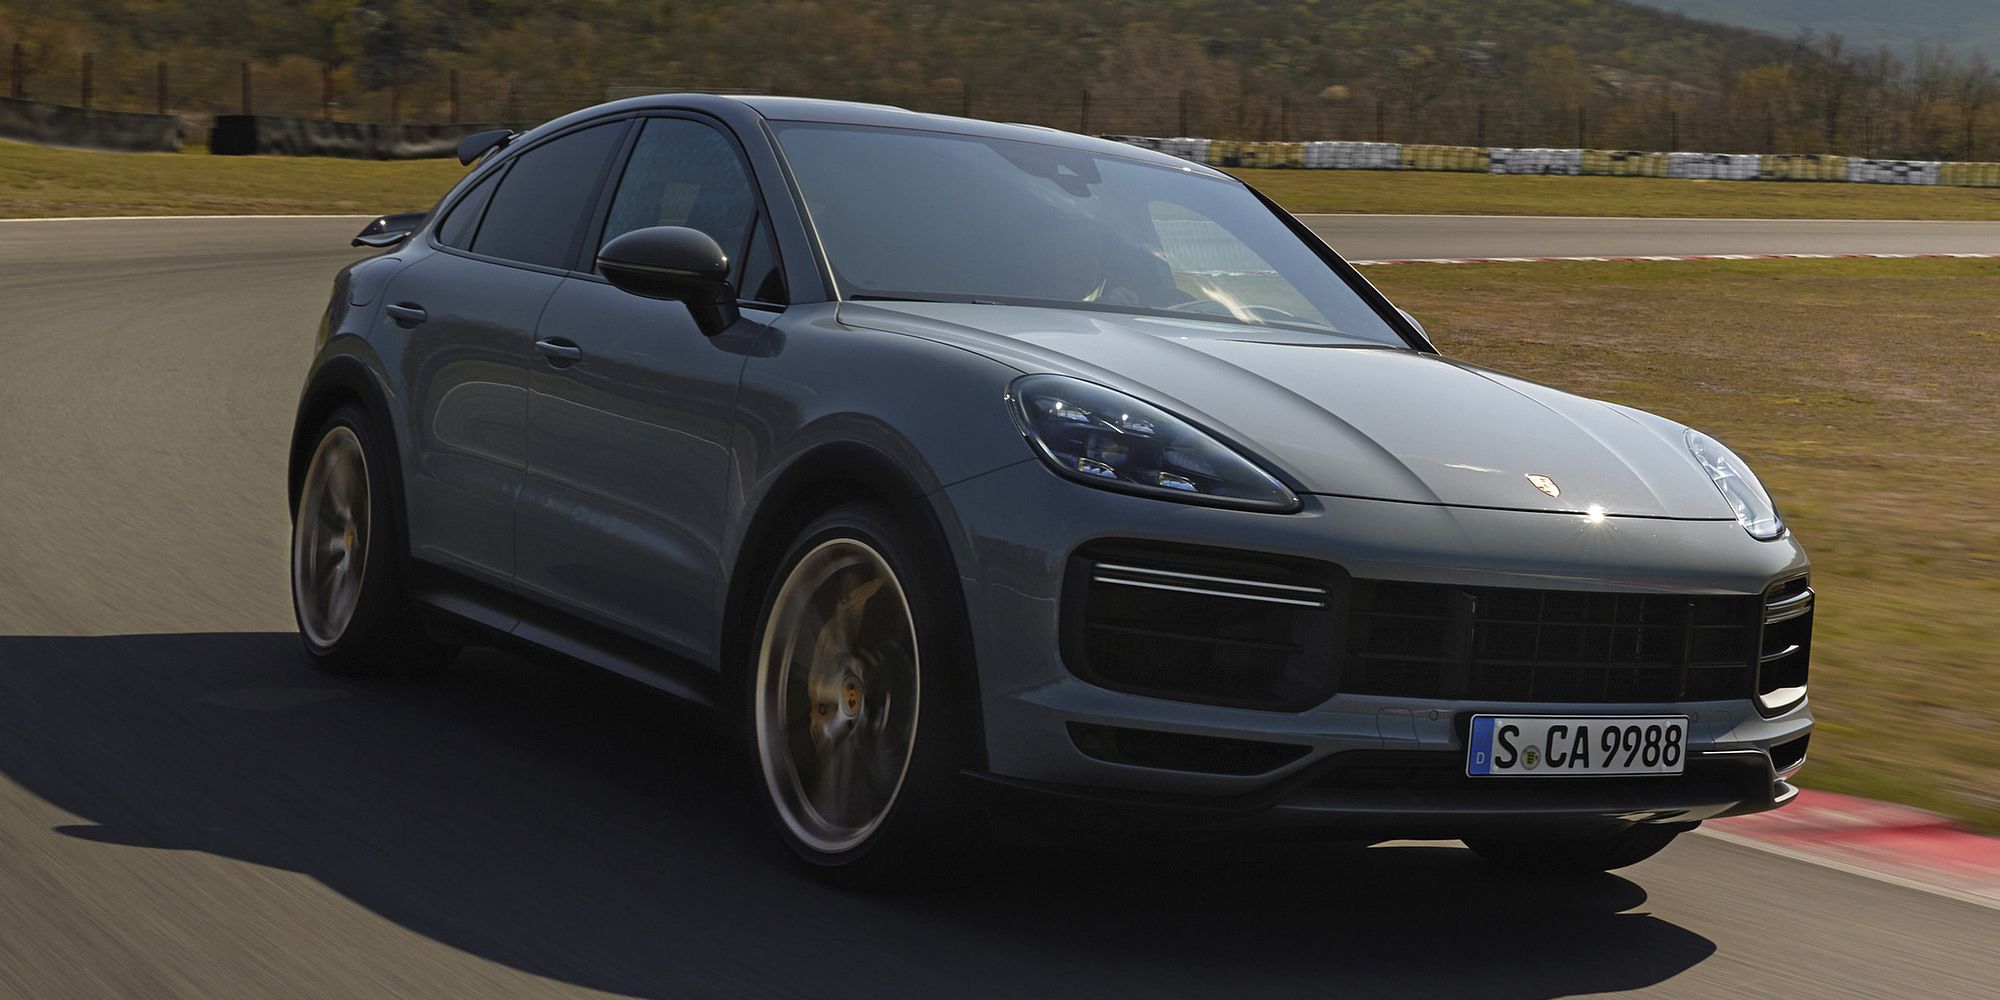 The front of the Cayenne Turbo GT on the move